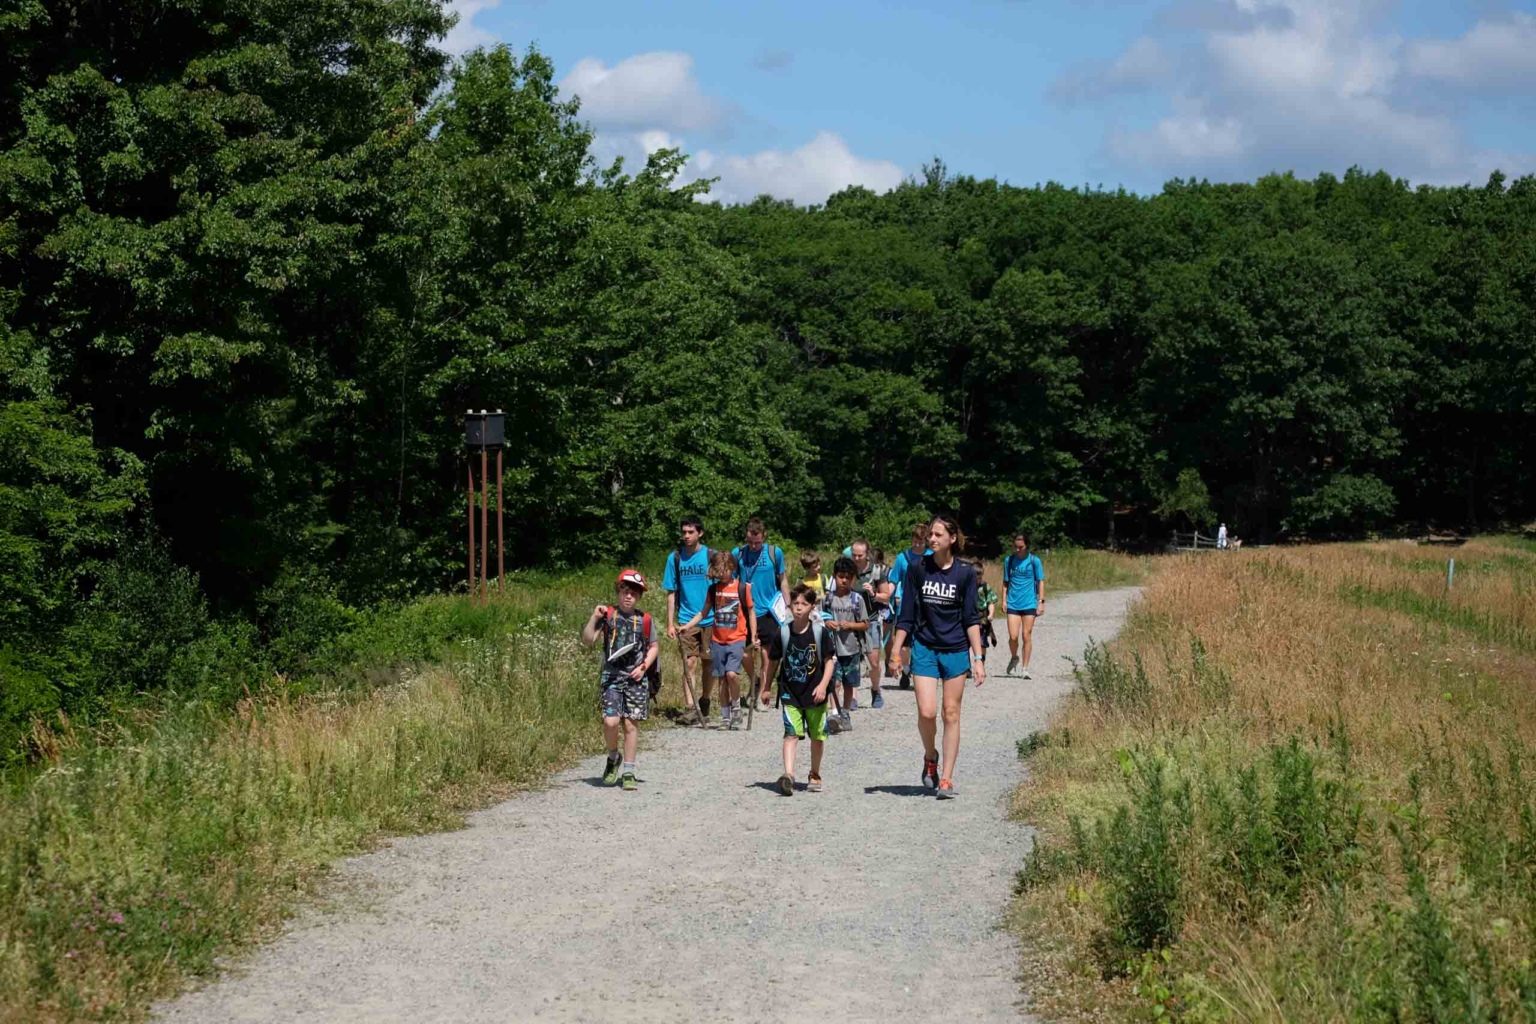 Campers walking down a path.